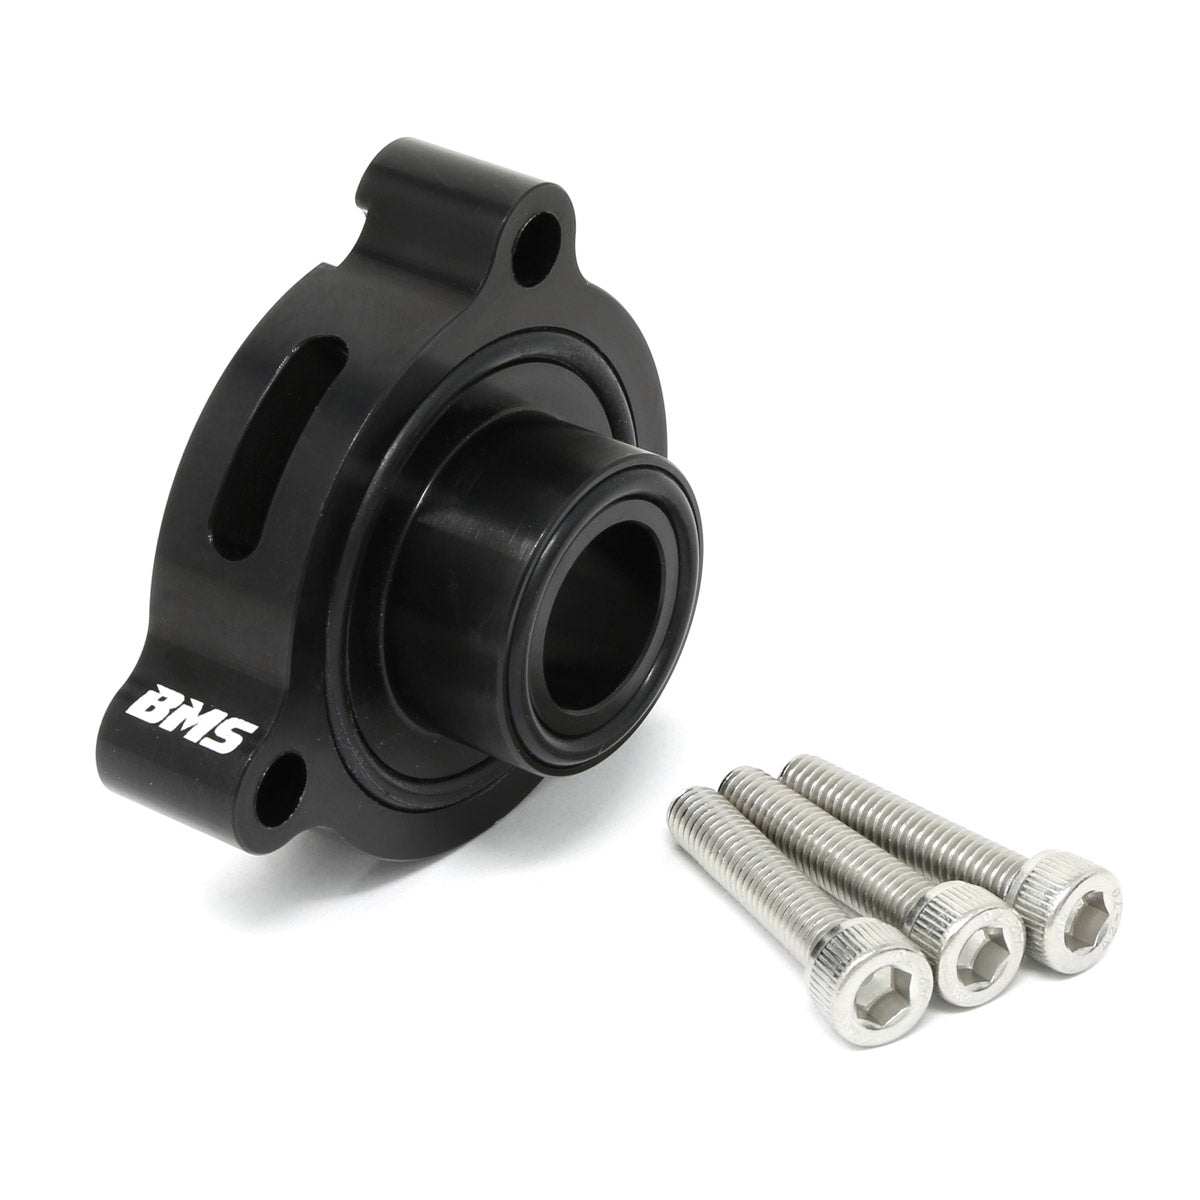 BMS Blow Off Valve (BOV) Adapters for 2020+ Cadillac CT5-V